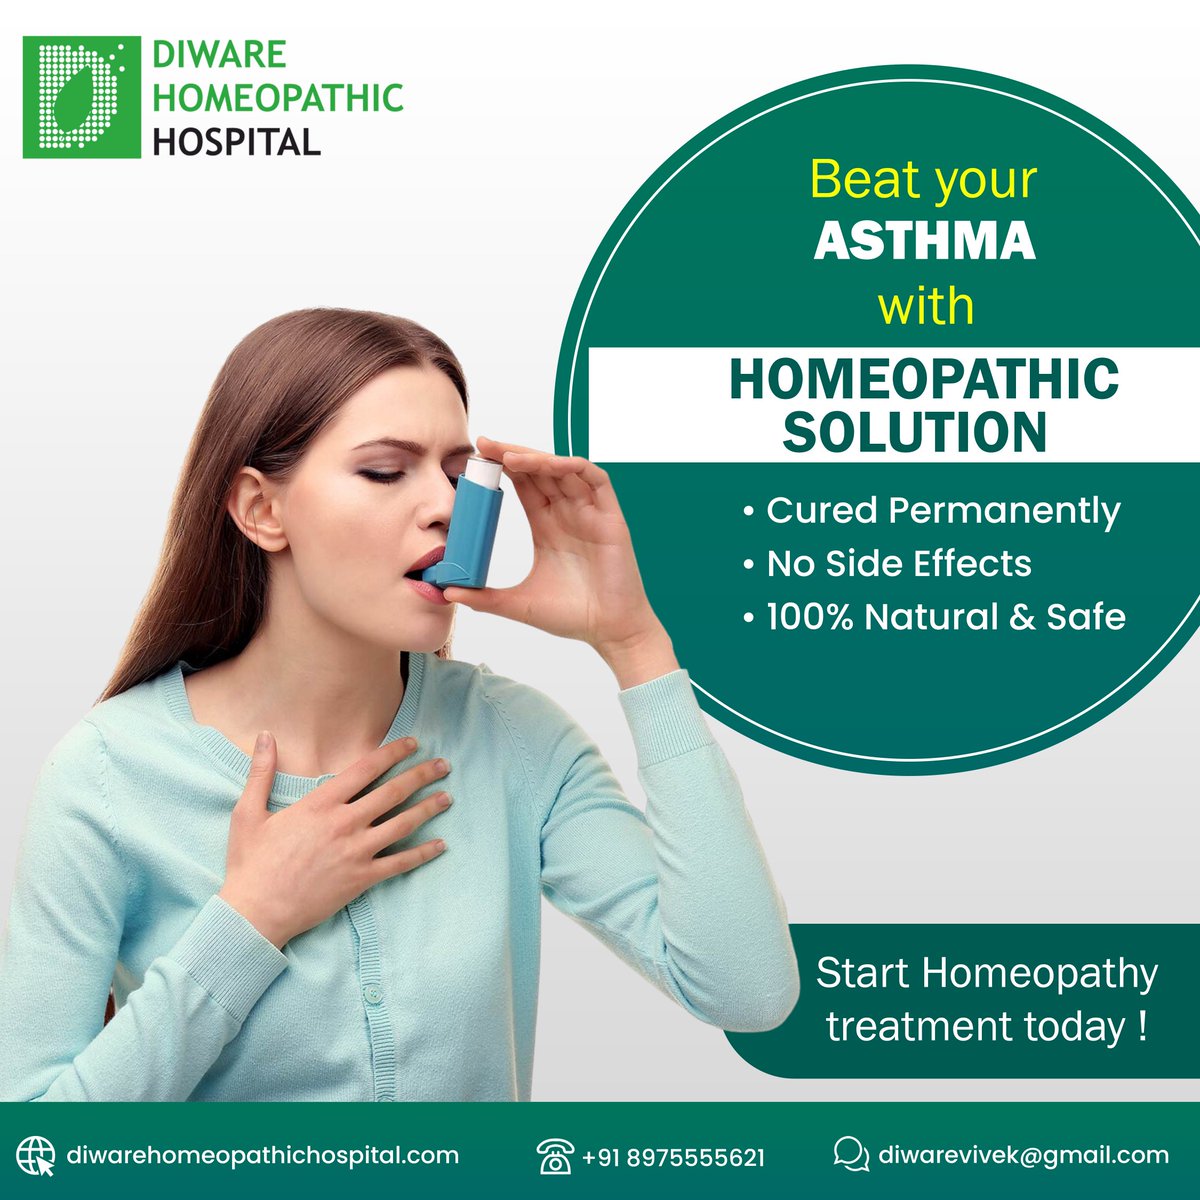 Beat your asthma with a homeopathic solution

It may be safe to try homeopathy in combination with traditional asthma treatment

Visit on :- diwarehomeopathichospital.com
#asthma #eczema #resdung #allergies #drdiware #gout #health #acne #homepathic  #homepathy #asthmatreatment #nagpur